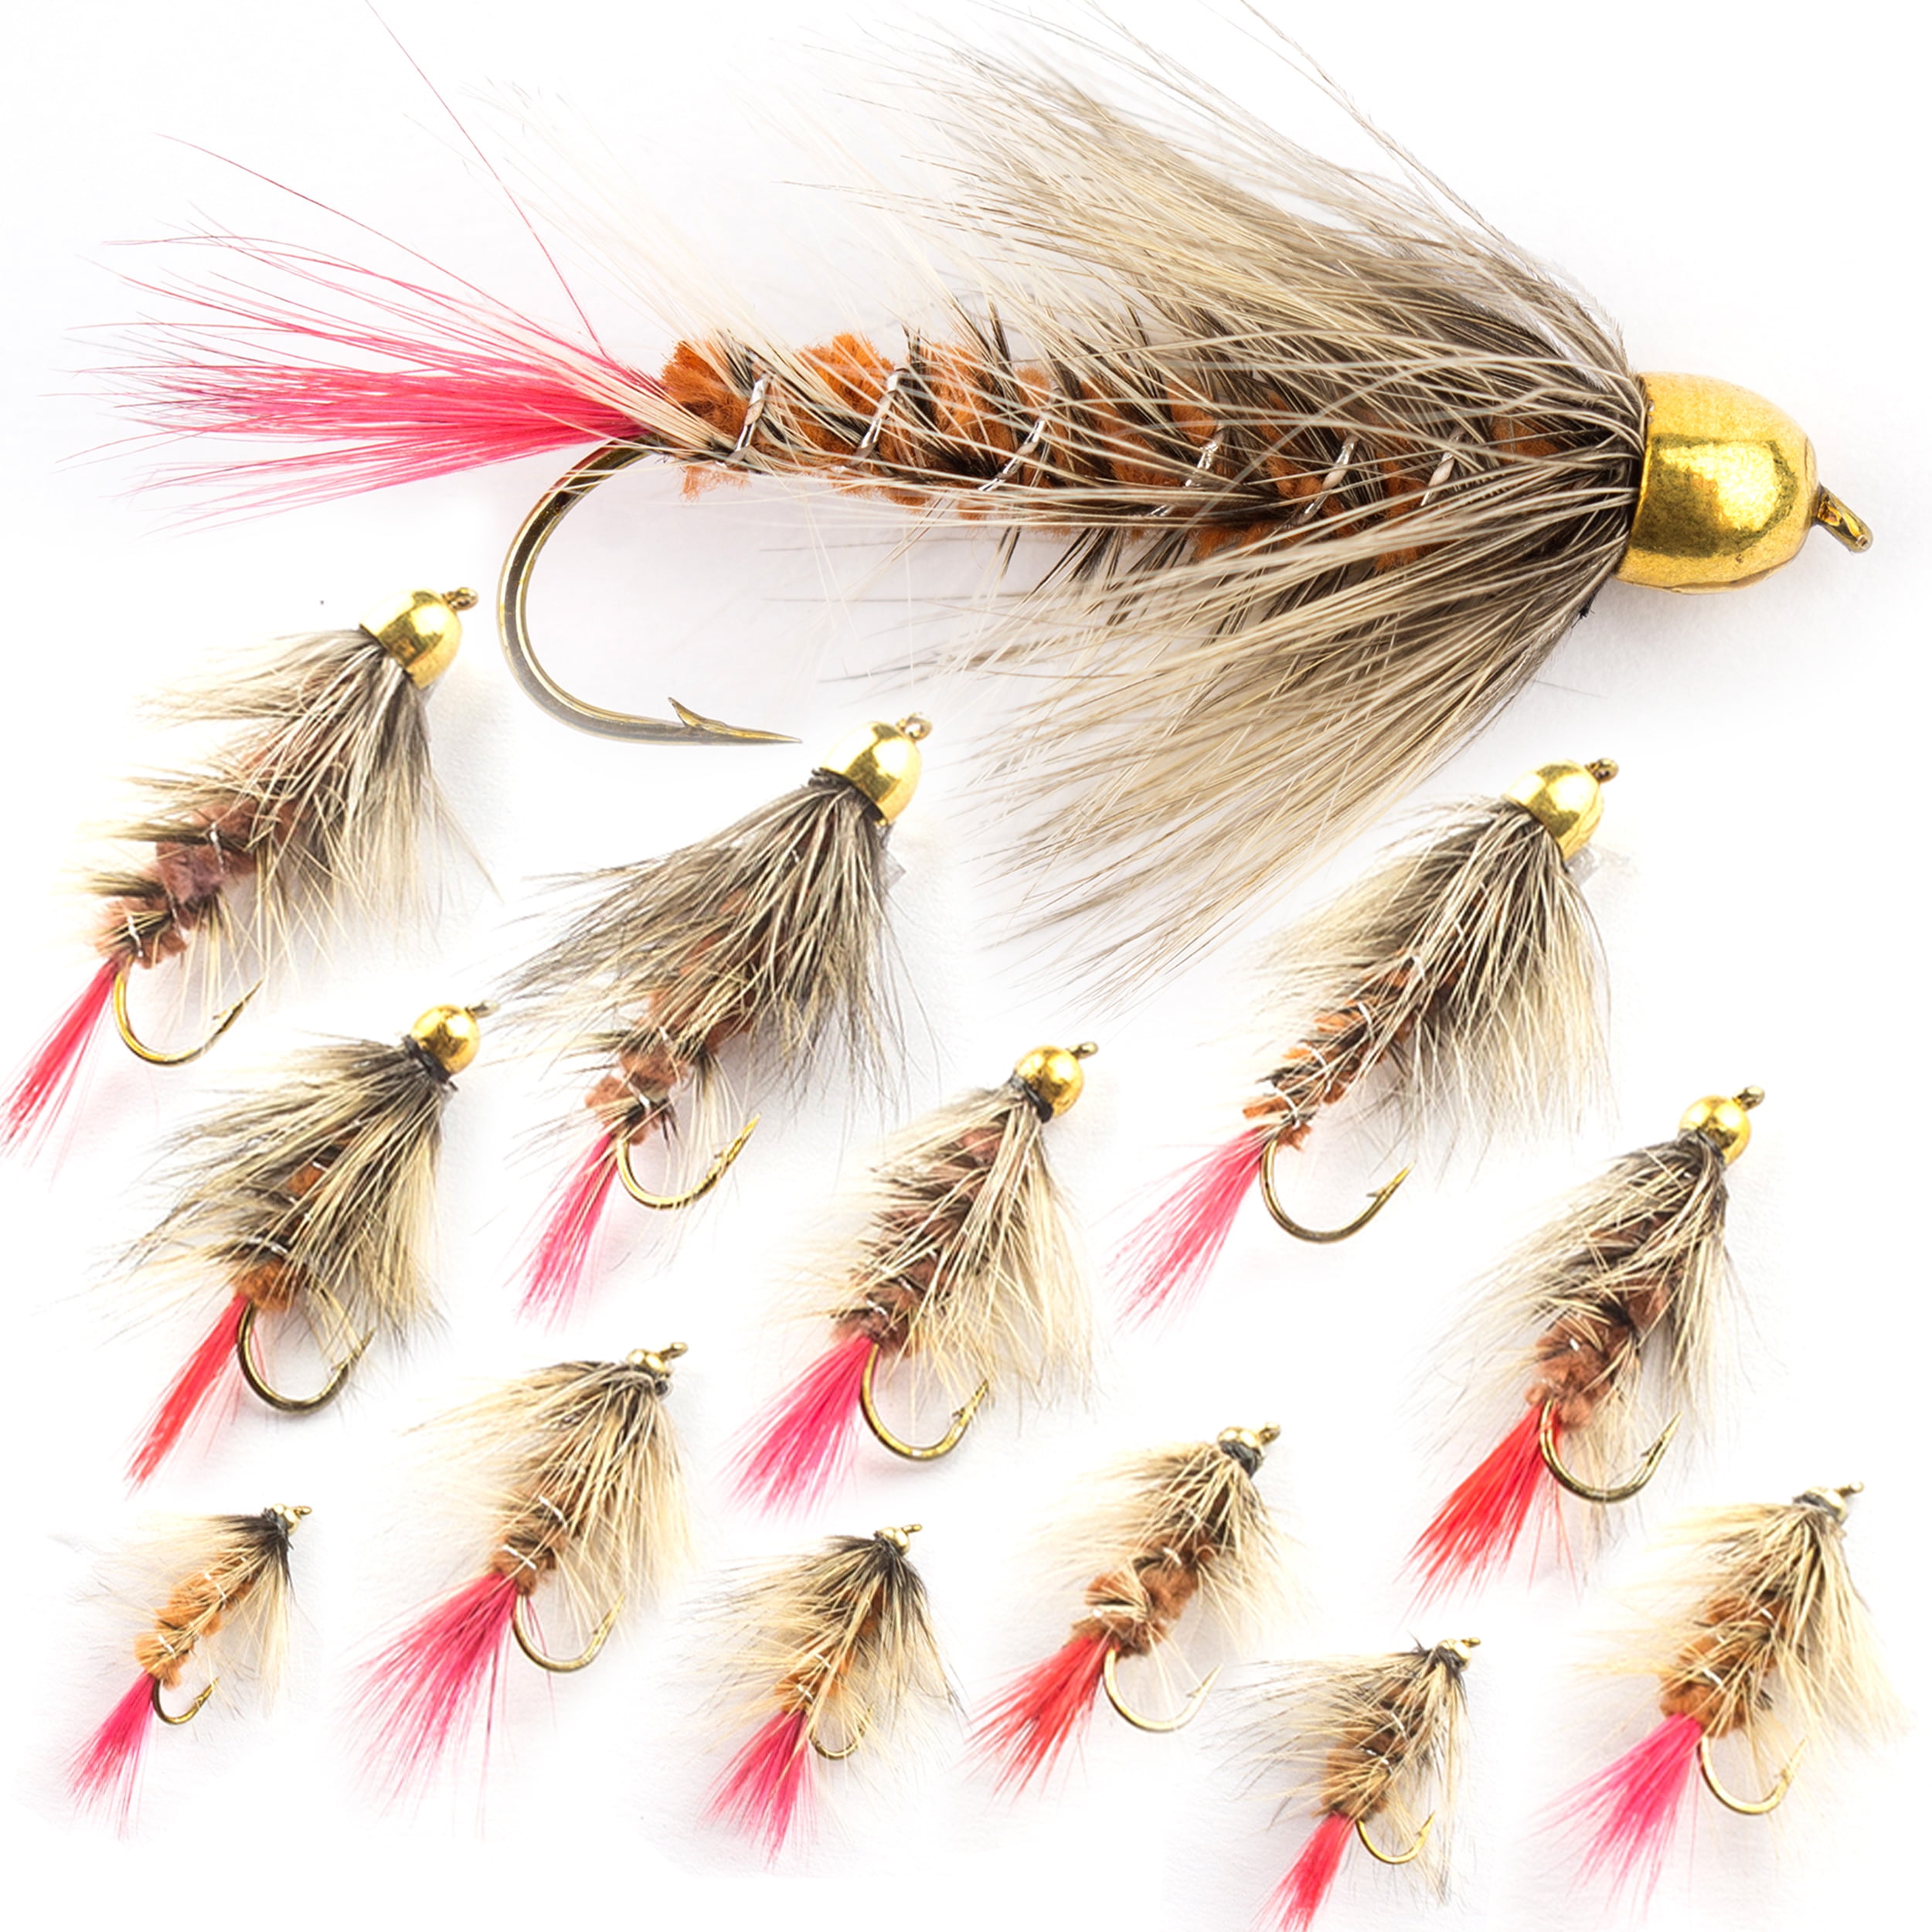 Black Wooly Buggers Fly Fishing Flies Size 8 Set Of 3  Hot Pink Bead Heads 